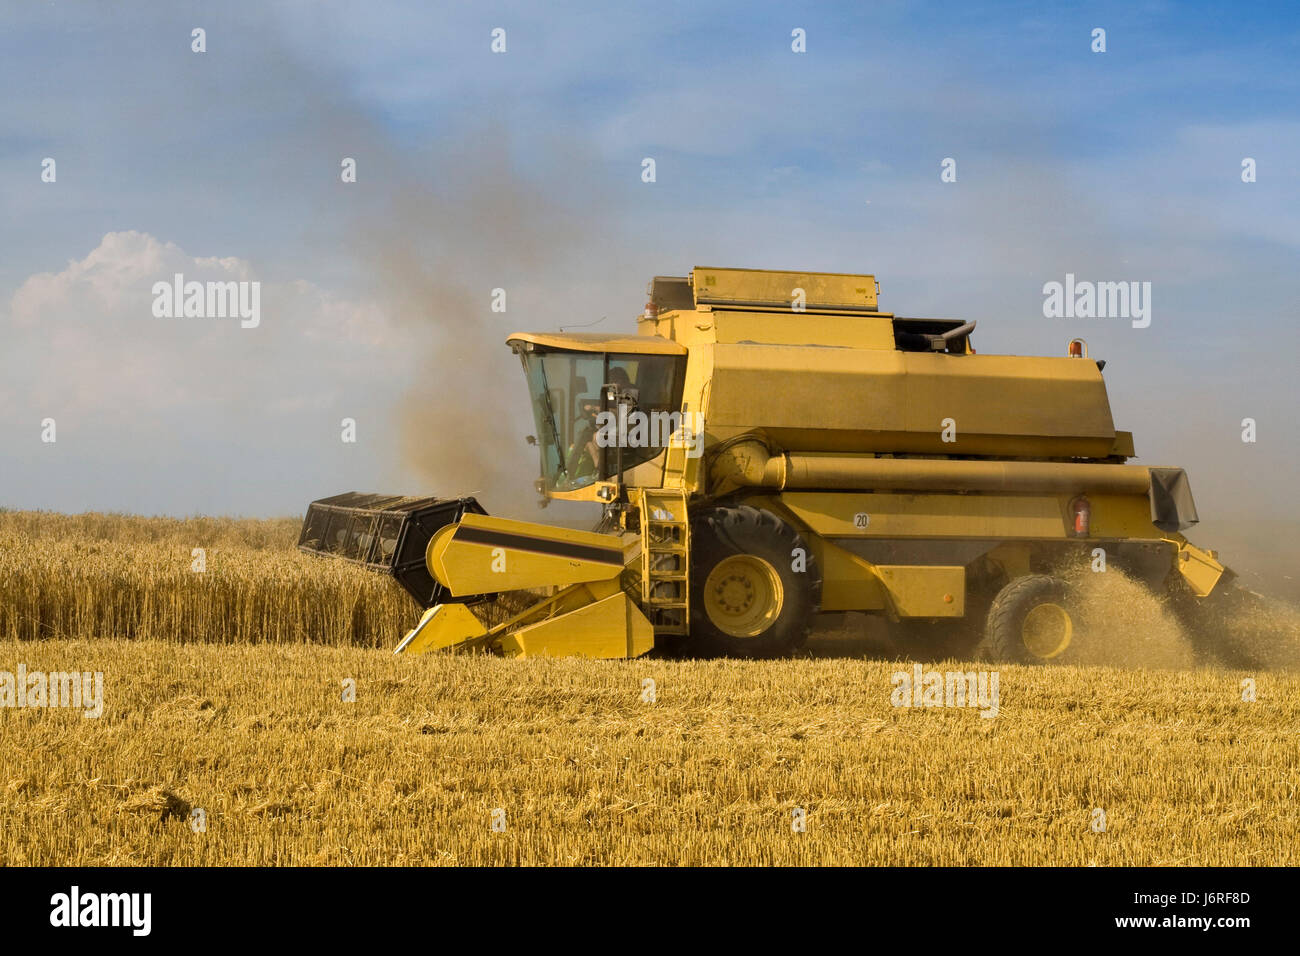 agriculture farming cereal harvester harvesting grain combine railway Stock Photo